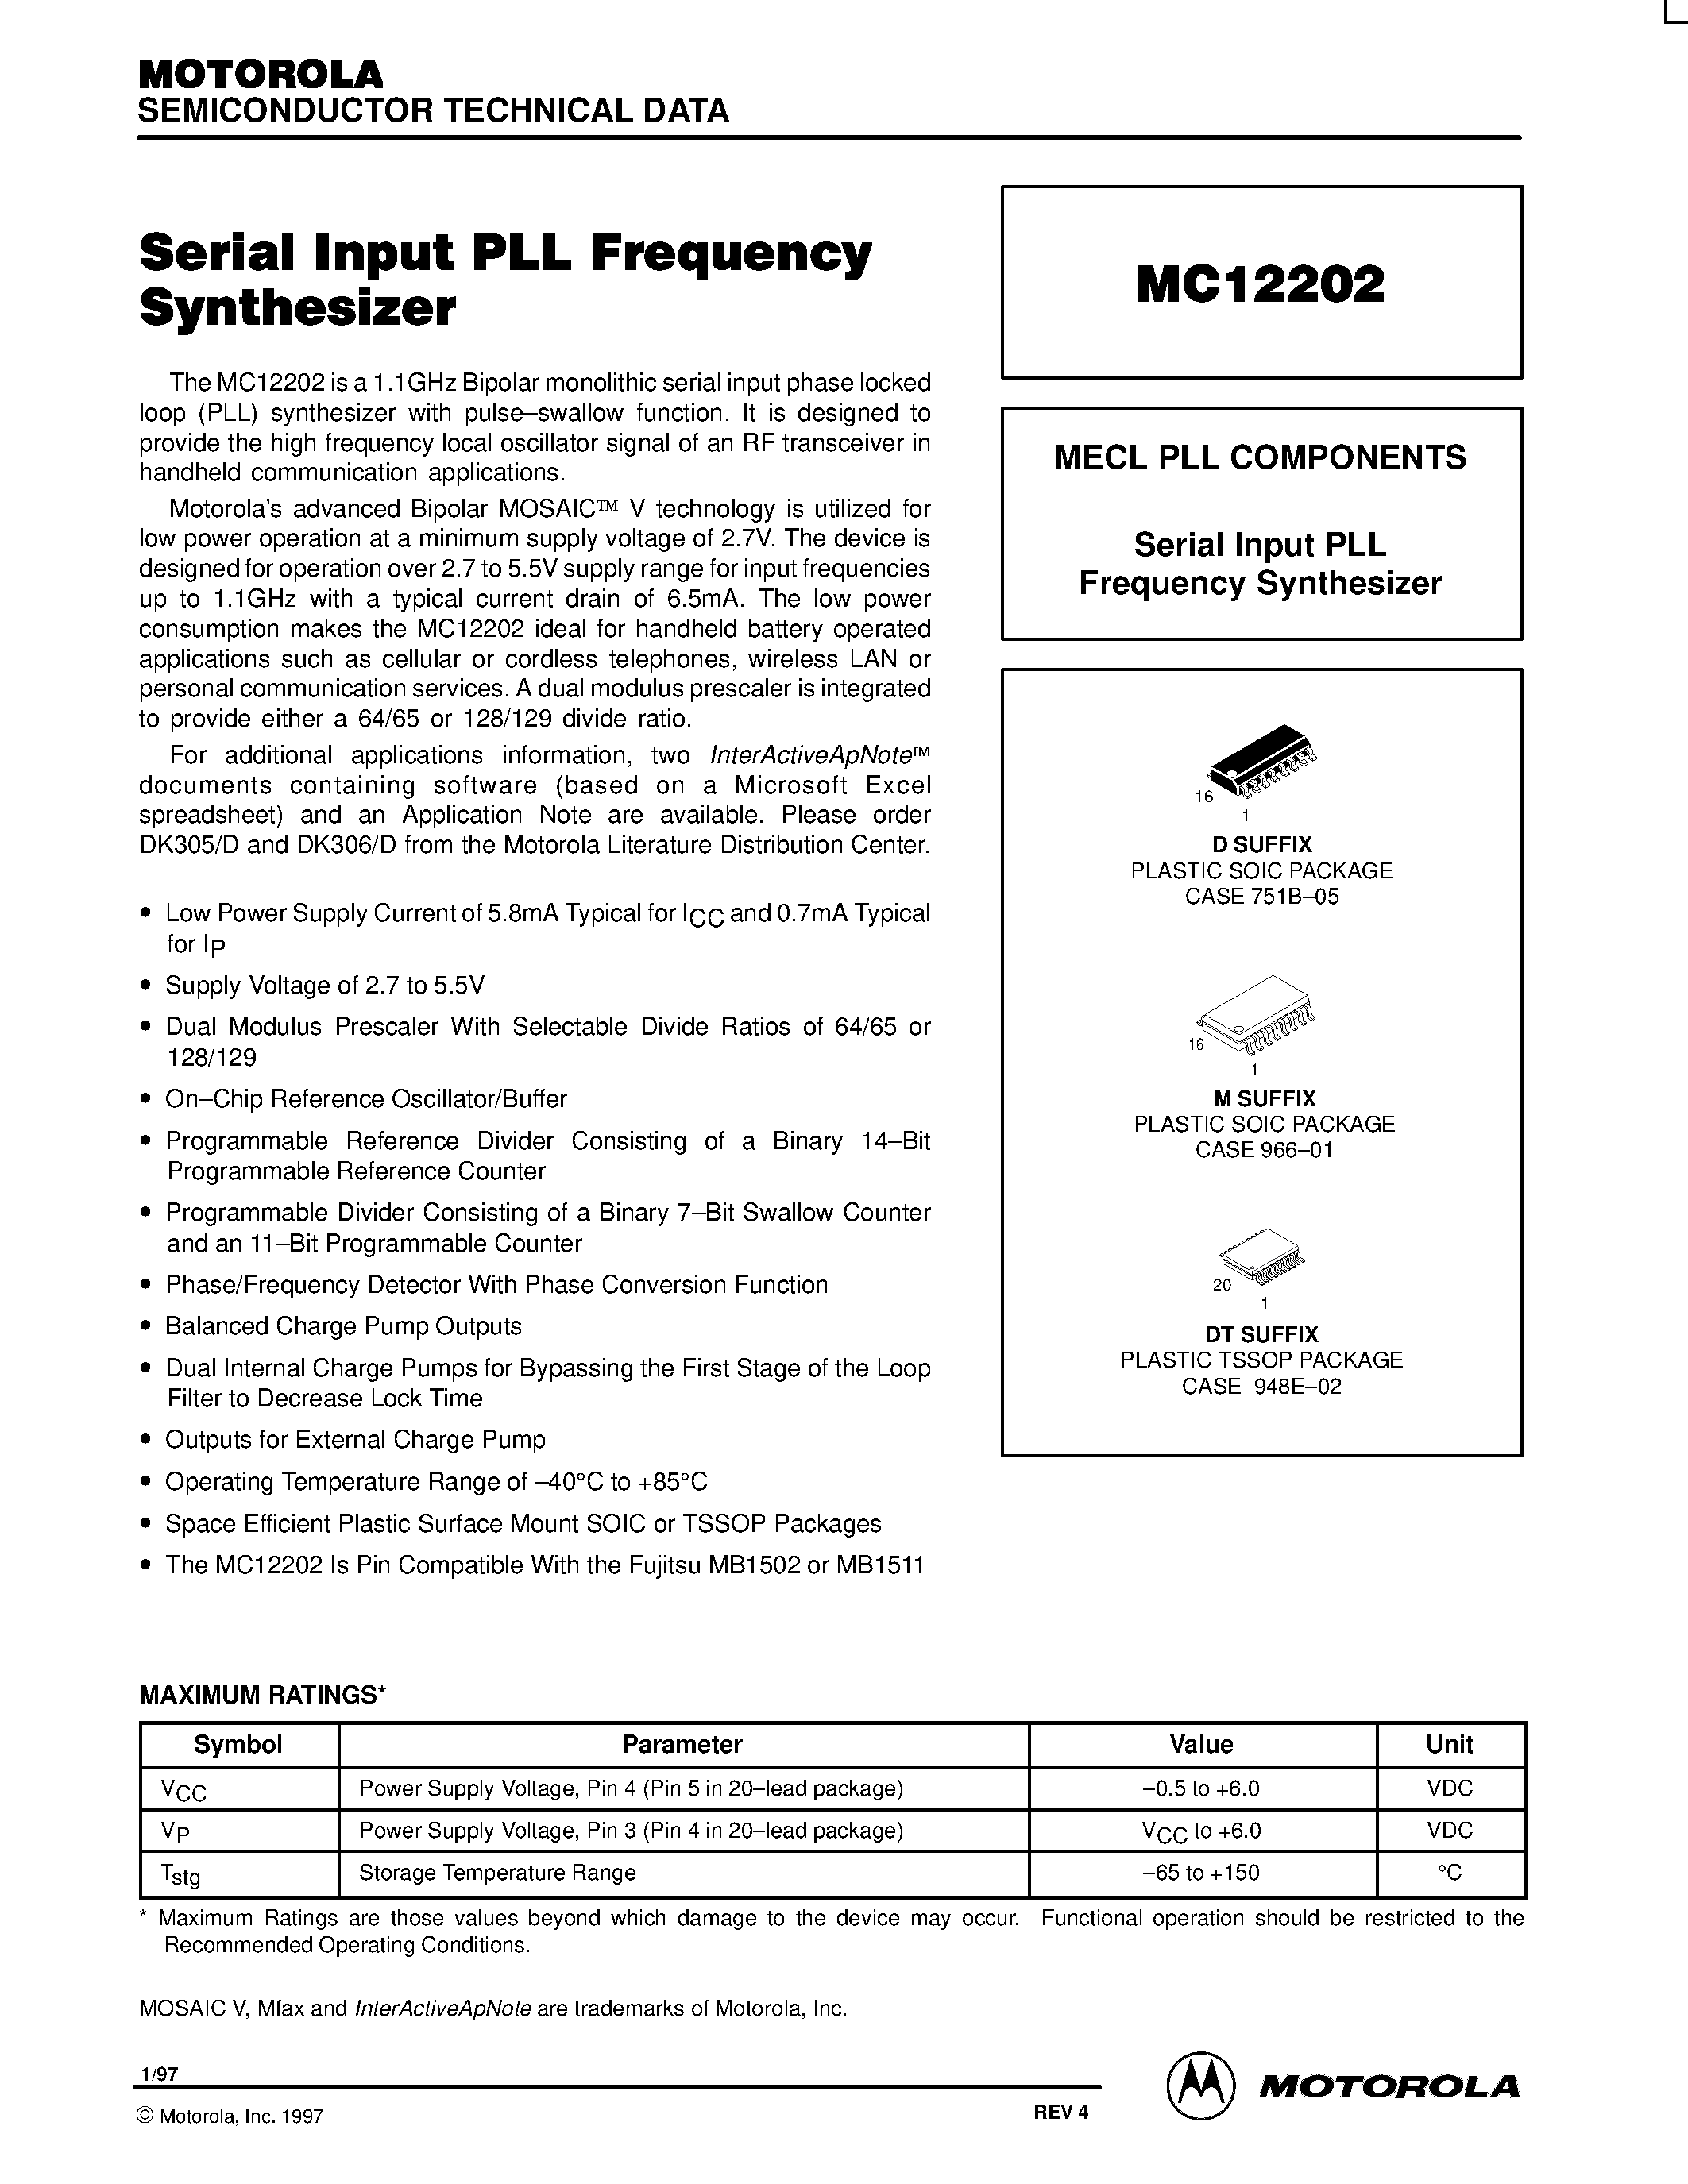 Datasheet MC12202DT - MECL PLL COMPONENTS Serial Input PLL Frequency Synthesizer page 1